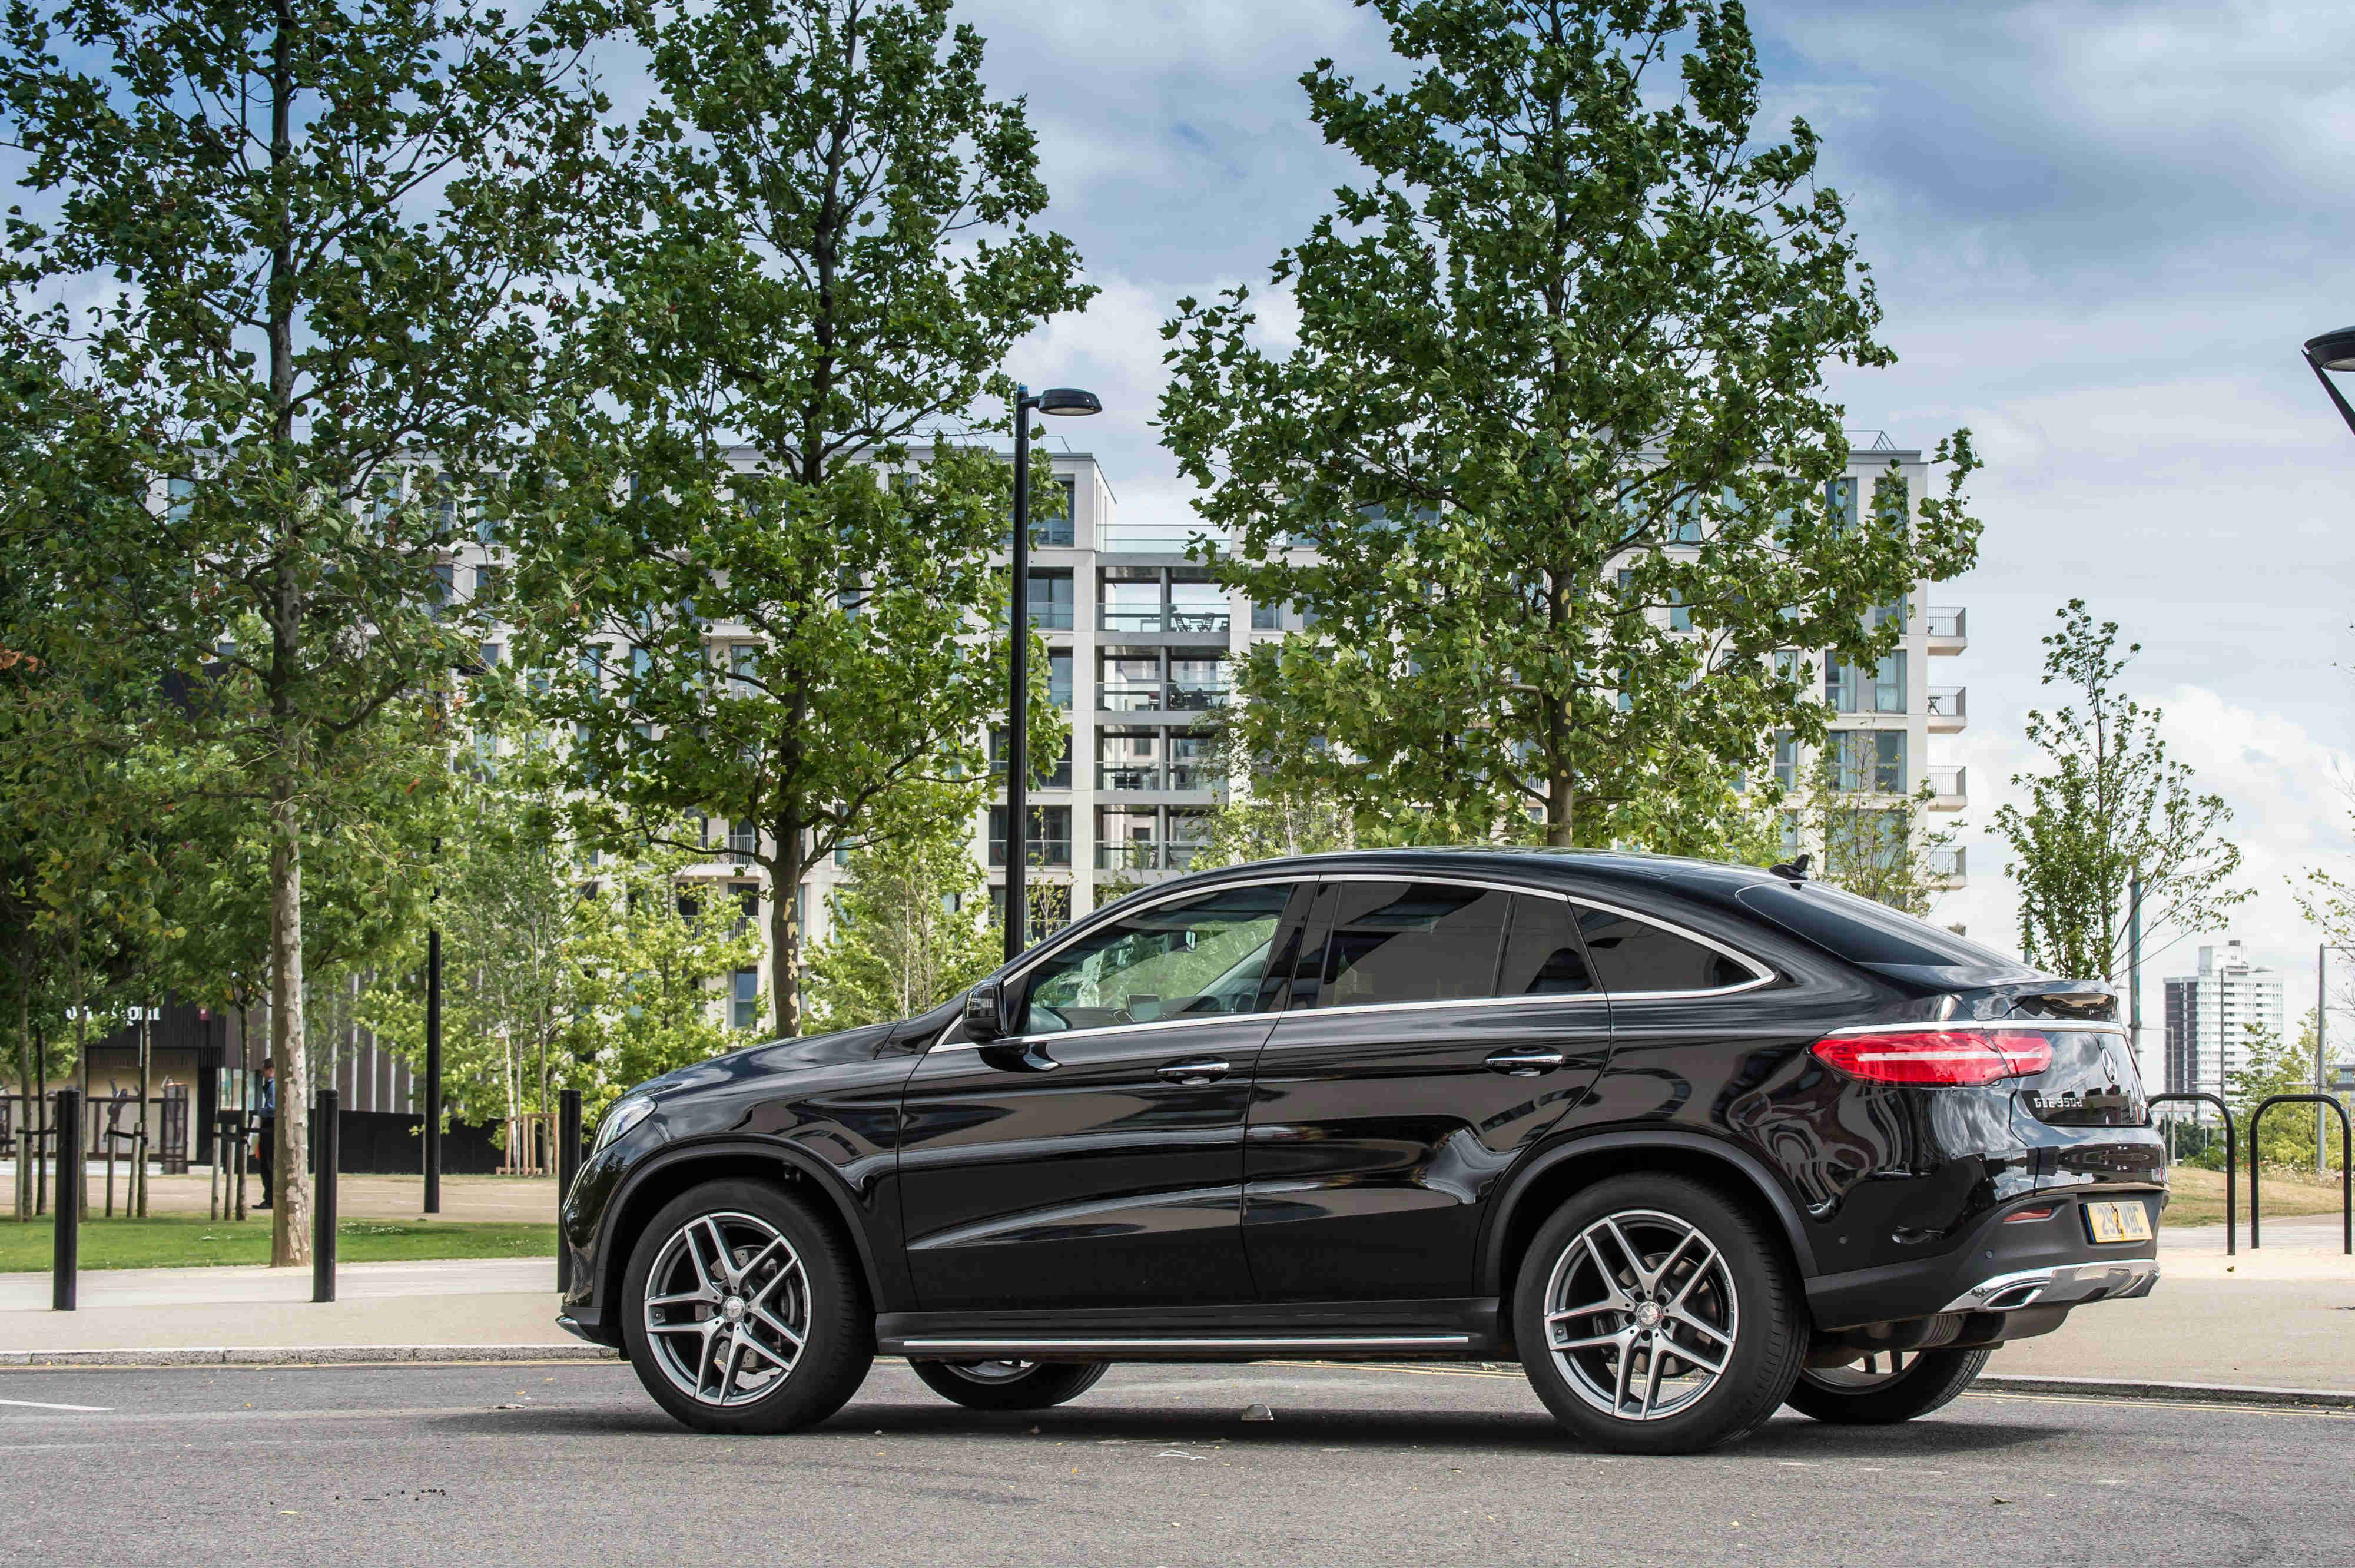 Review of the 2015 Mercedes GLE 450 AMG coupe by The Sunday Times Driving